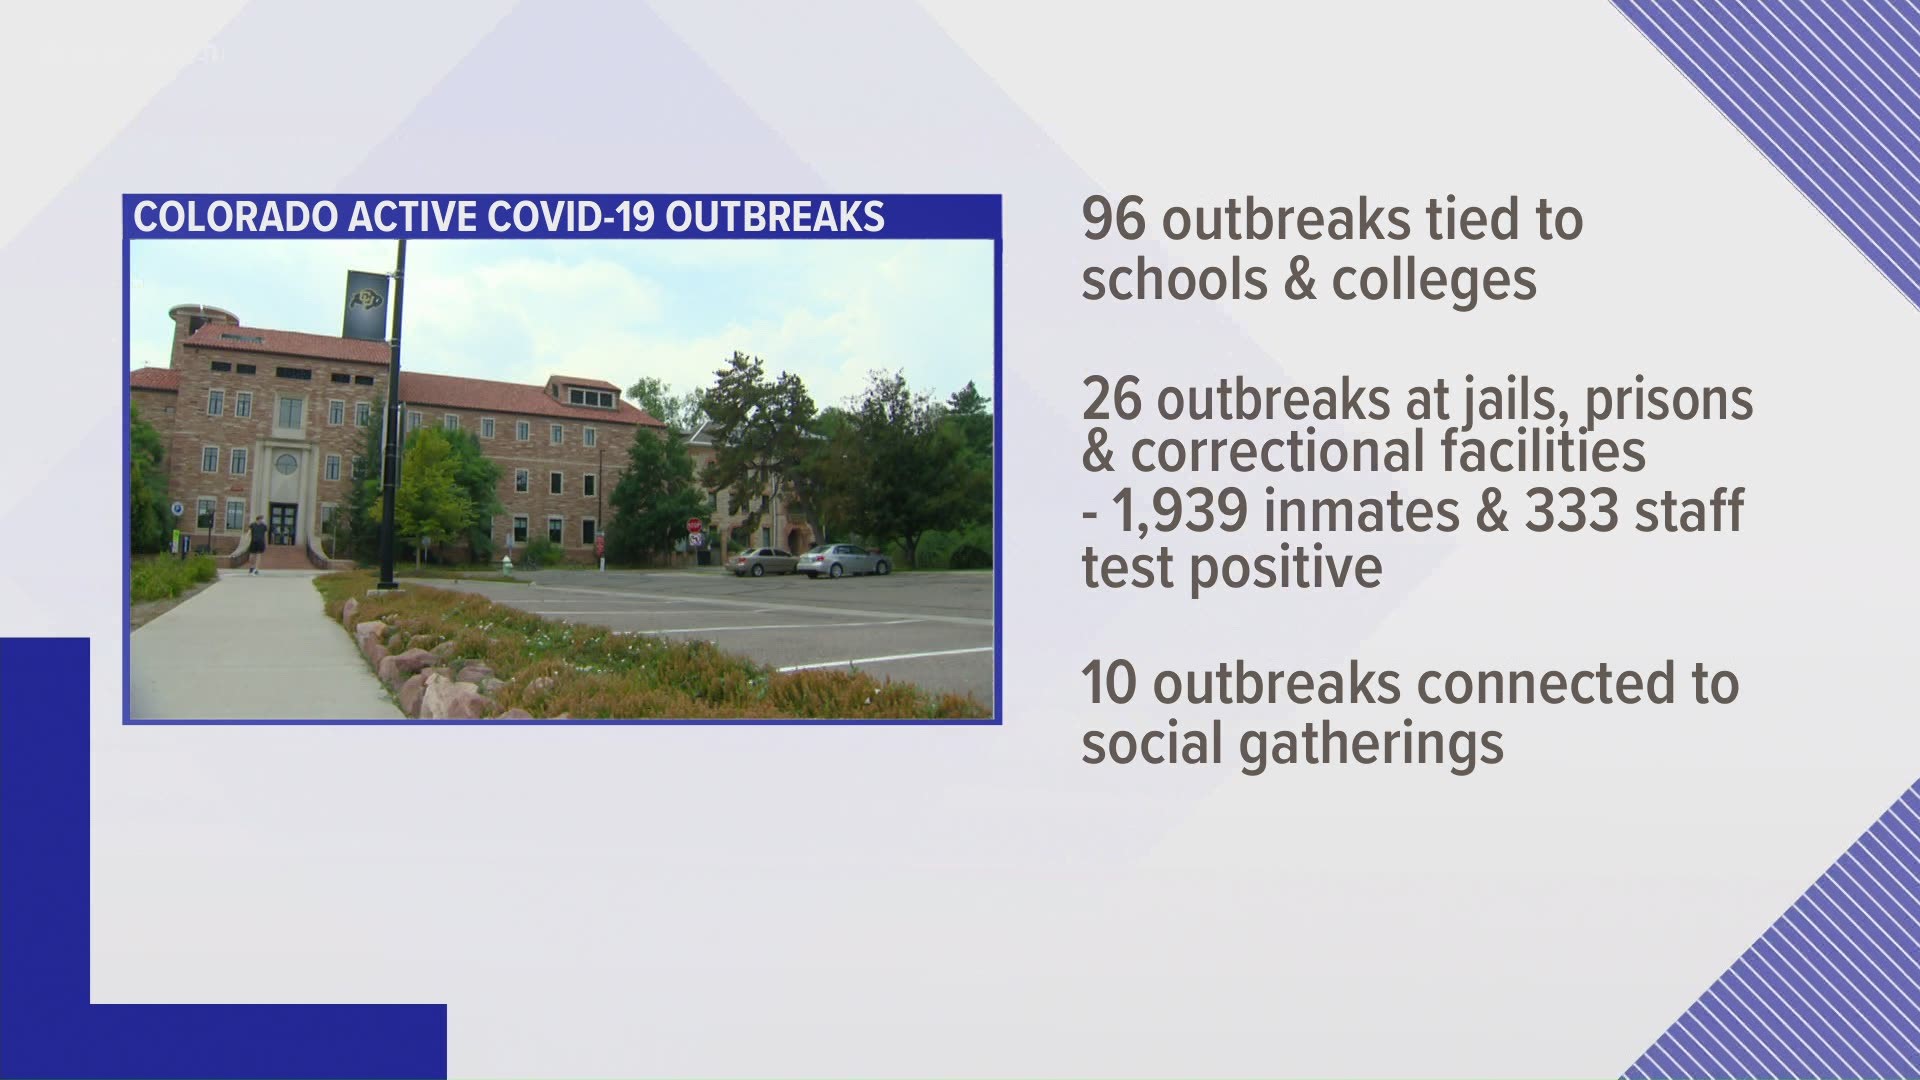 There are 587 COVID-19 outbreaks that are listed as active in Colorado as of Nov. 4.